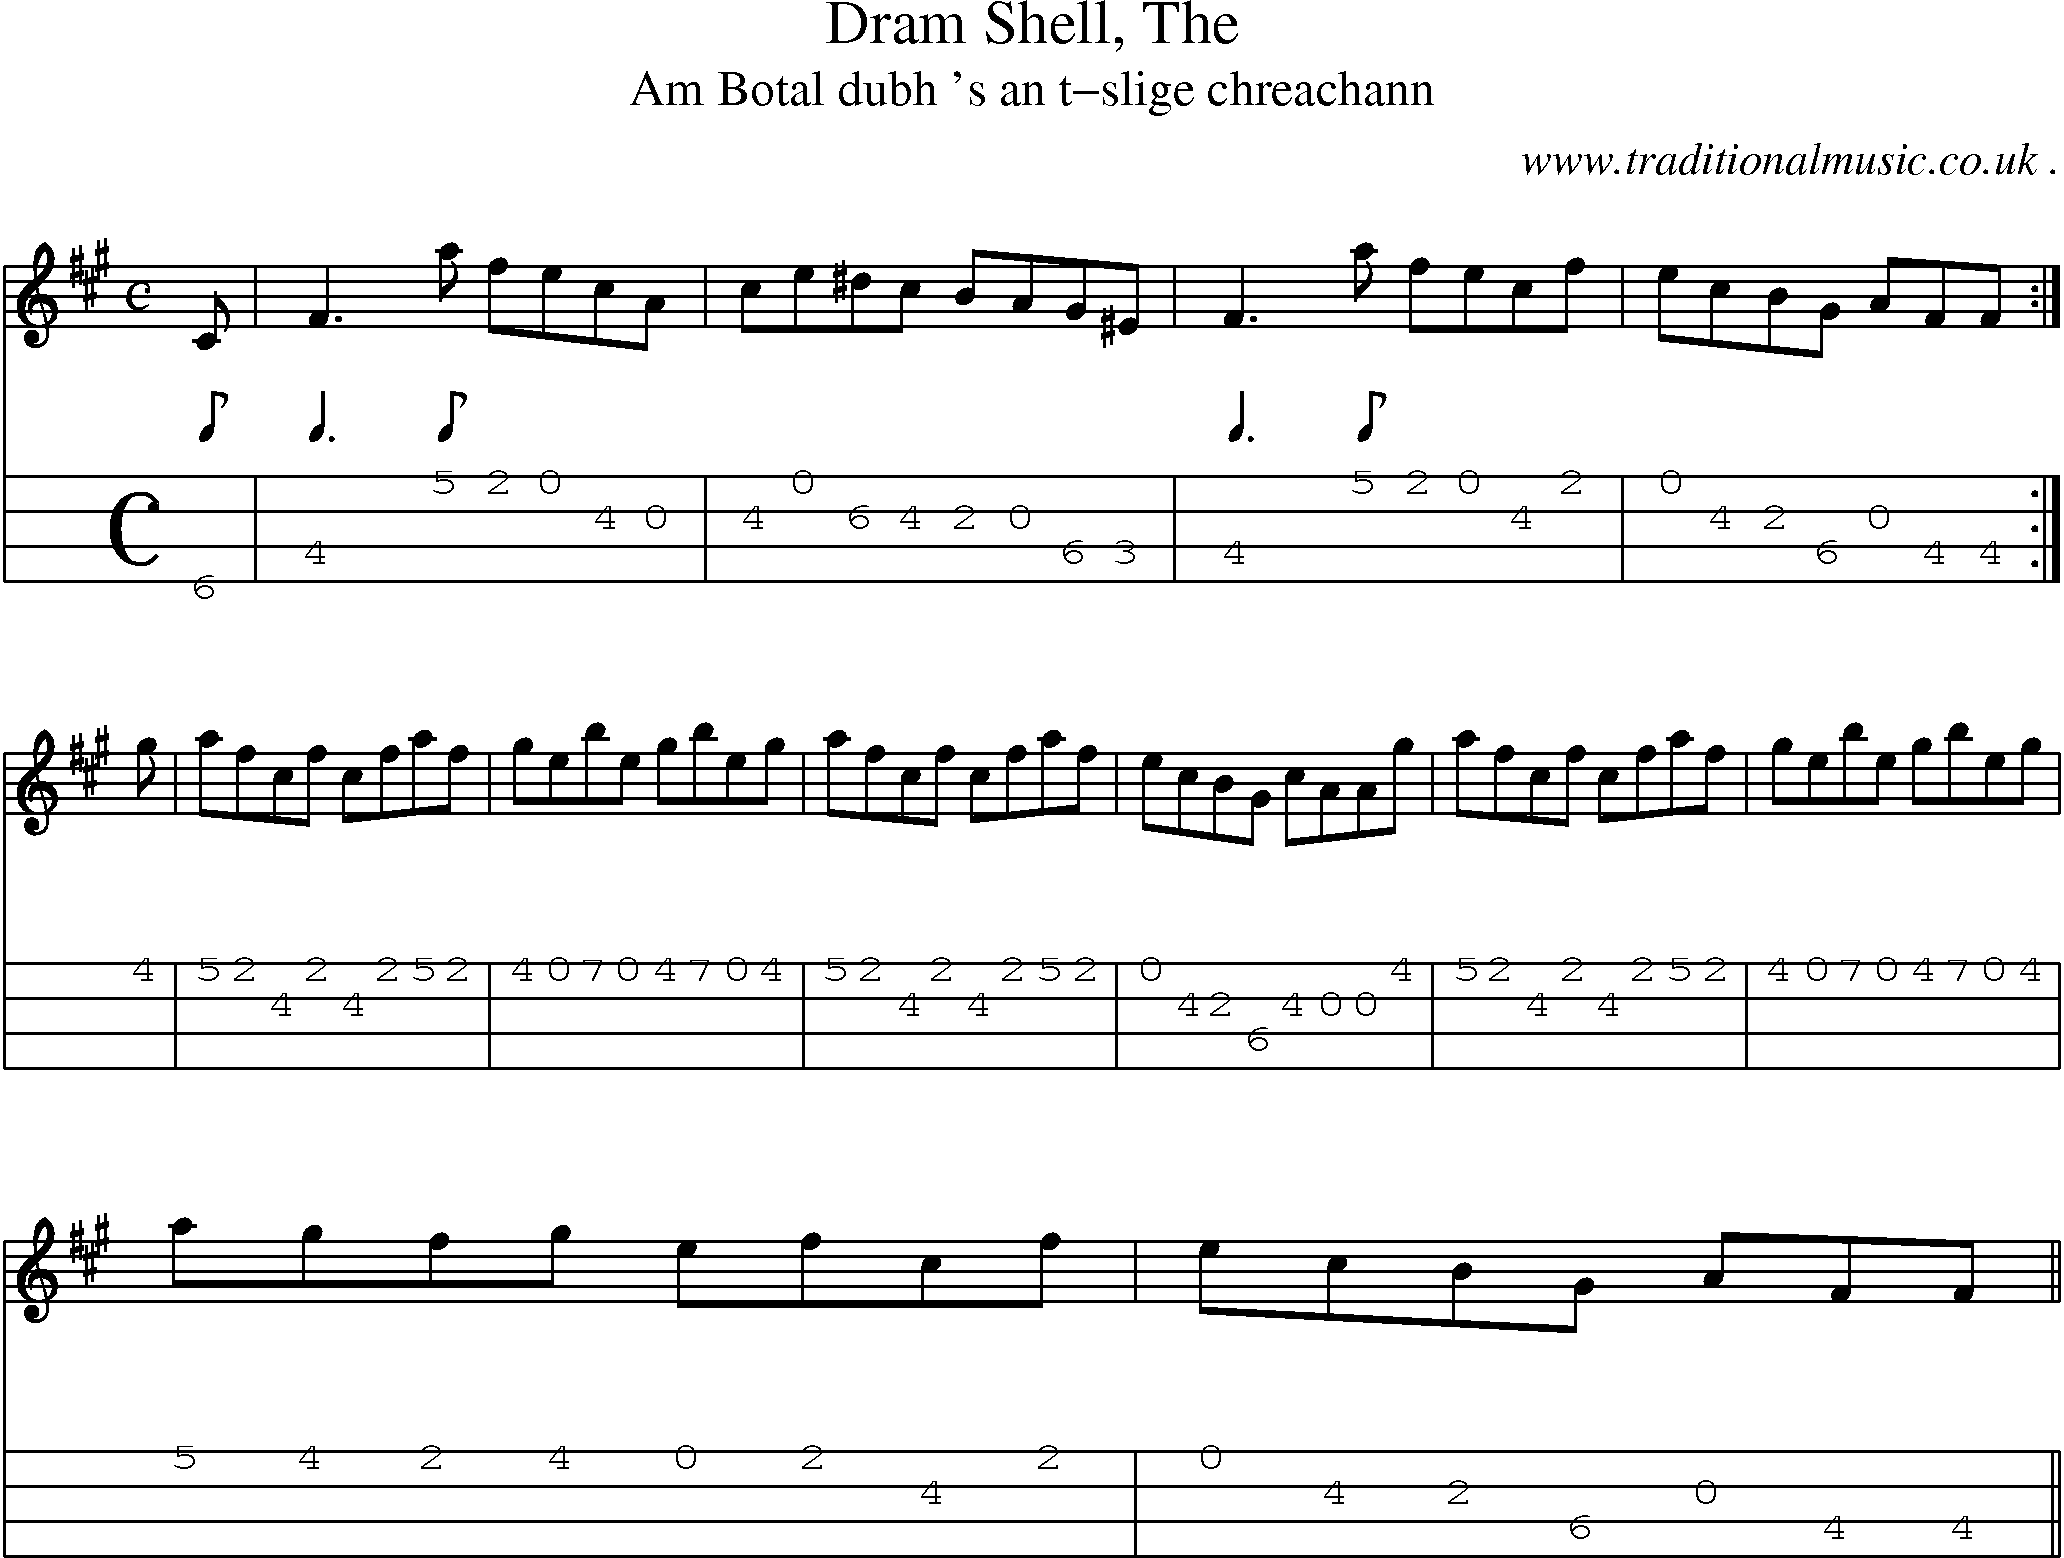 Sheet-music  score, Chords and Mandolin Tabs for Dram Shell The